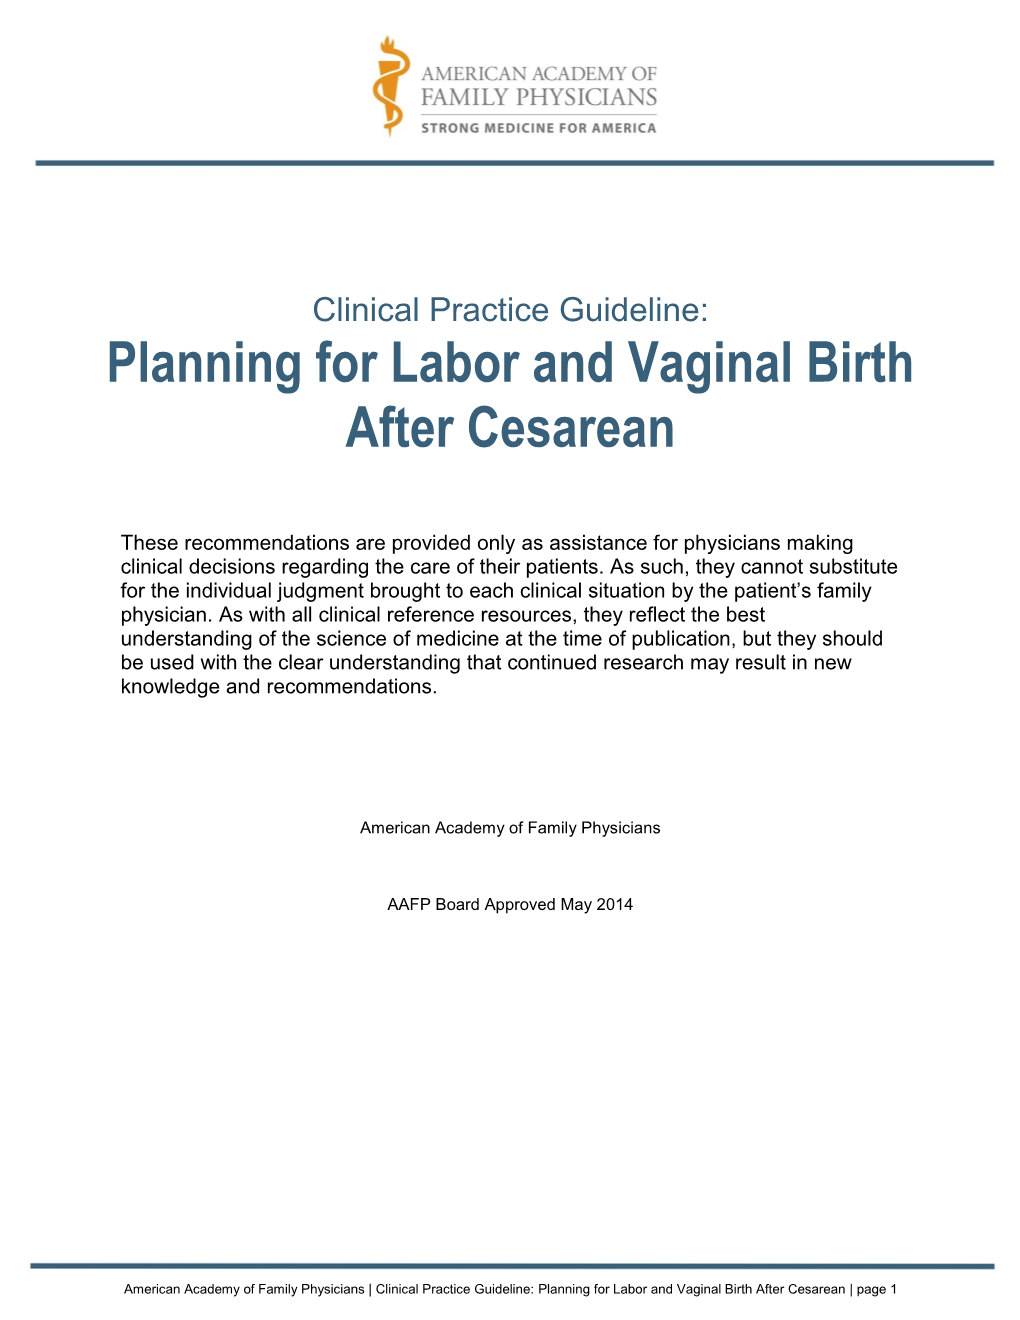 Clinical Practice Guideline: Planning for Labor and Vaginal Birth After Cesarean